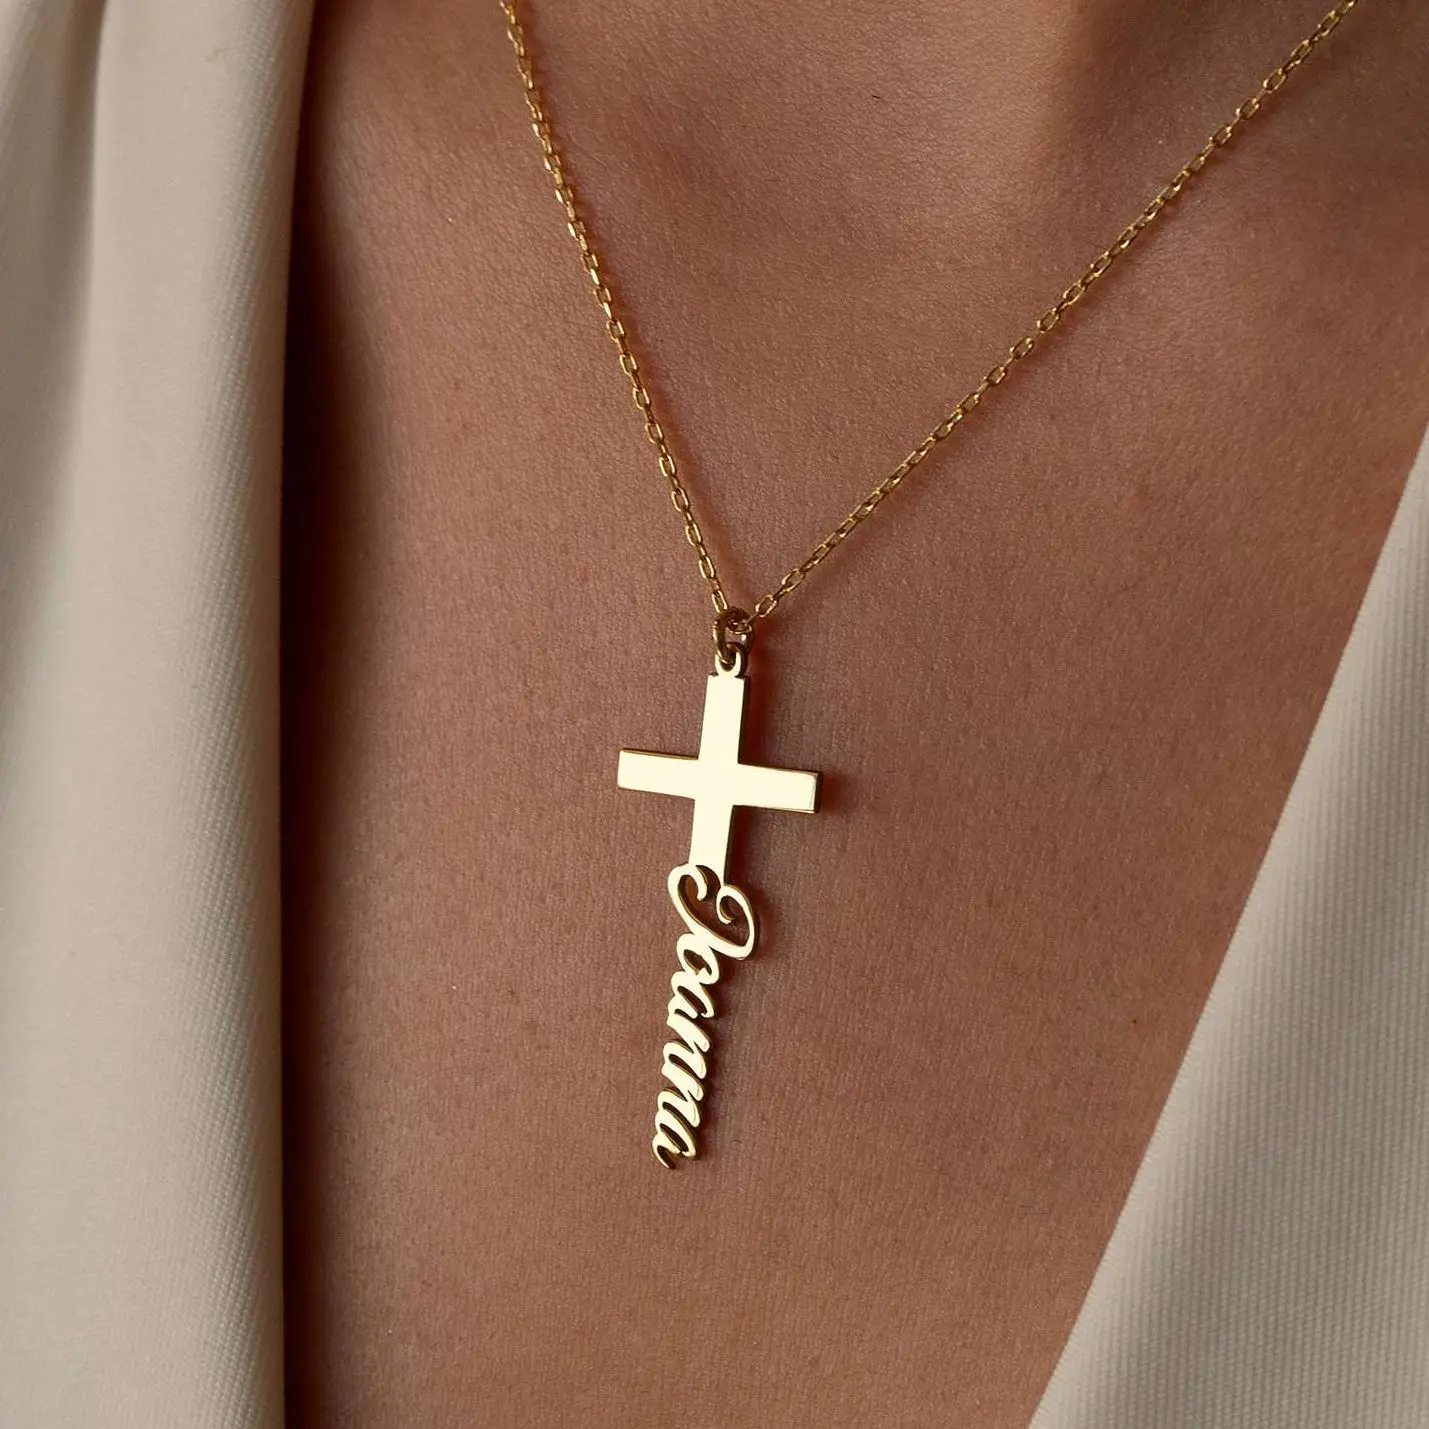 Personalized Cross Necklace with Name Stainless Steel Custom Name Pendant Cross Necklace Gift for Friend my phonics 1a the alphabet activity book with cross platform application